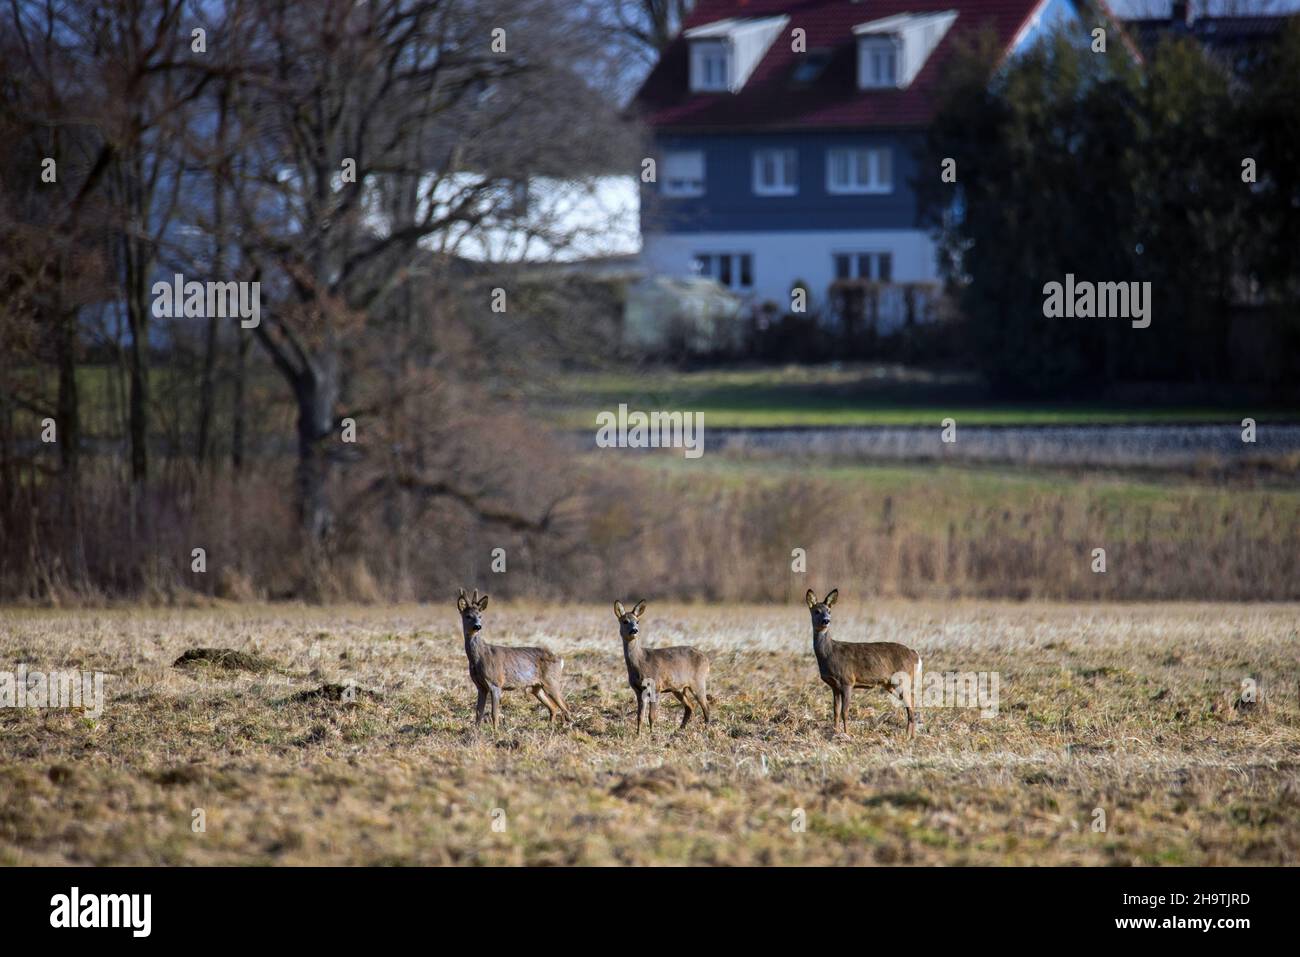 roe deer (Capreolus capreolus), Buck and two females in a meadow in winter with houses in the background, Germany Stock Photo